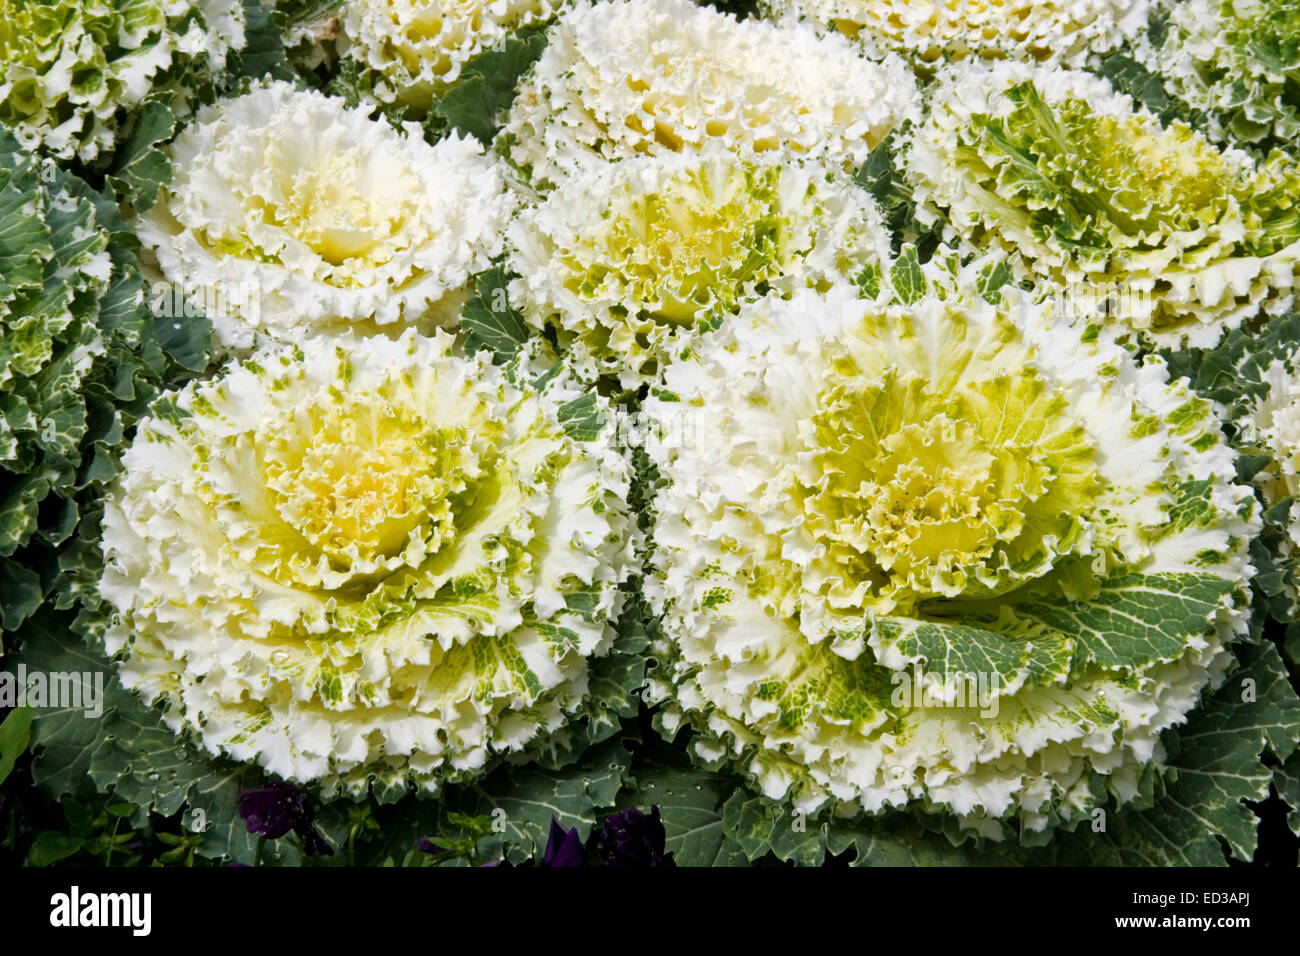 Decorative mass planting of ornamental kale / cabbage, Brassica oleracea, with wavy yellow, white, and green foliage Stock Photo